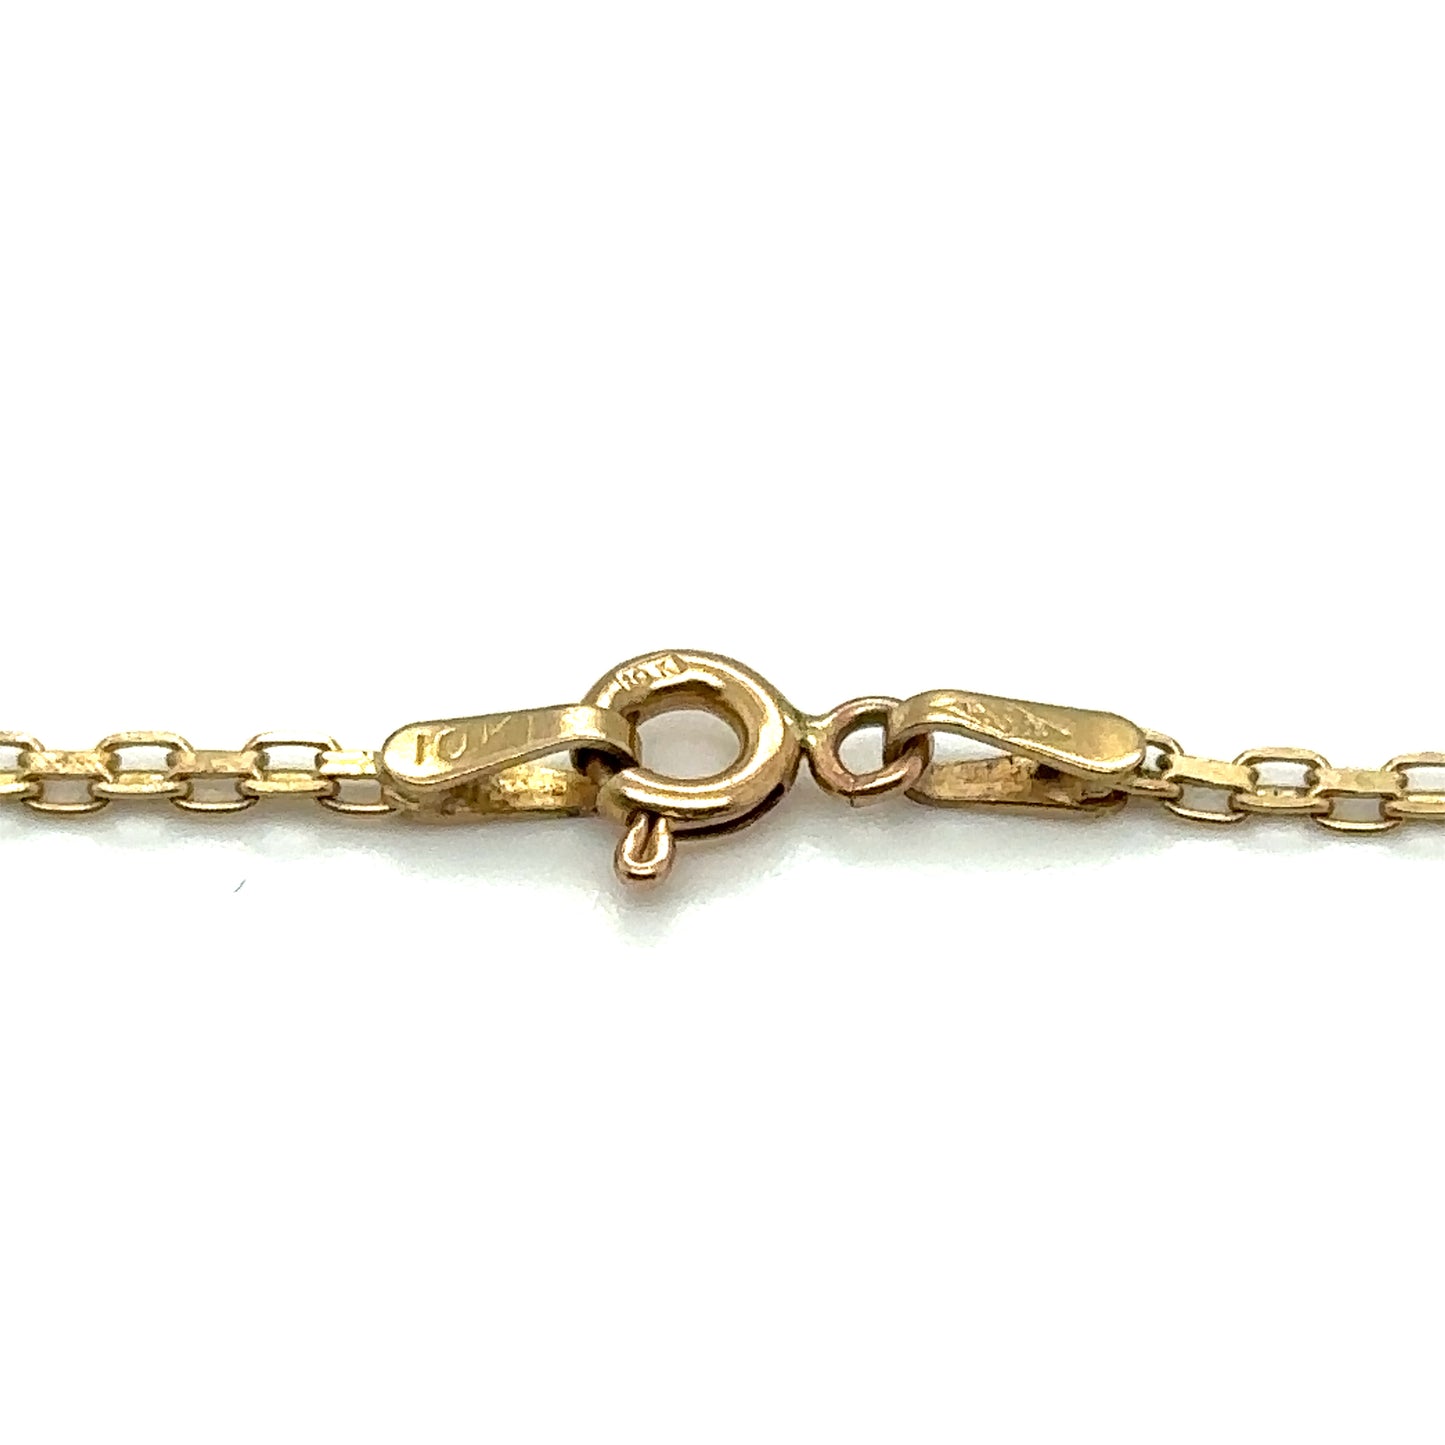 Circa 1990s Chinese Character Charm Bracelet in 10K Gold